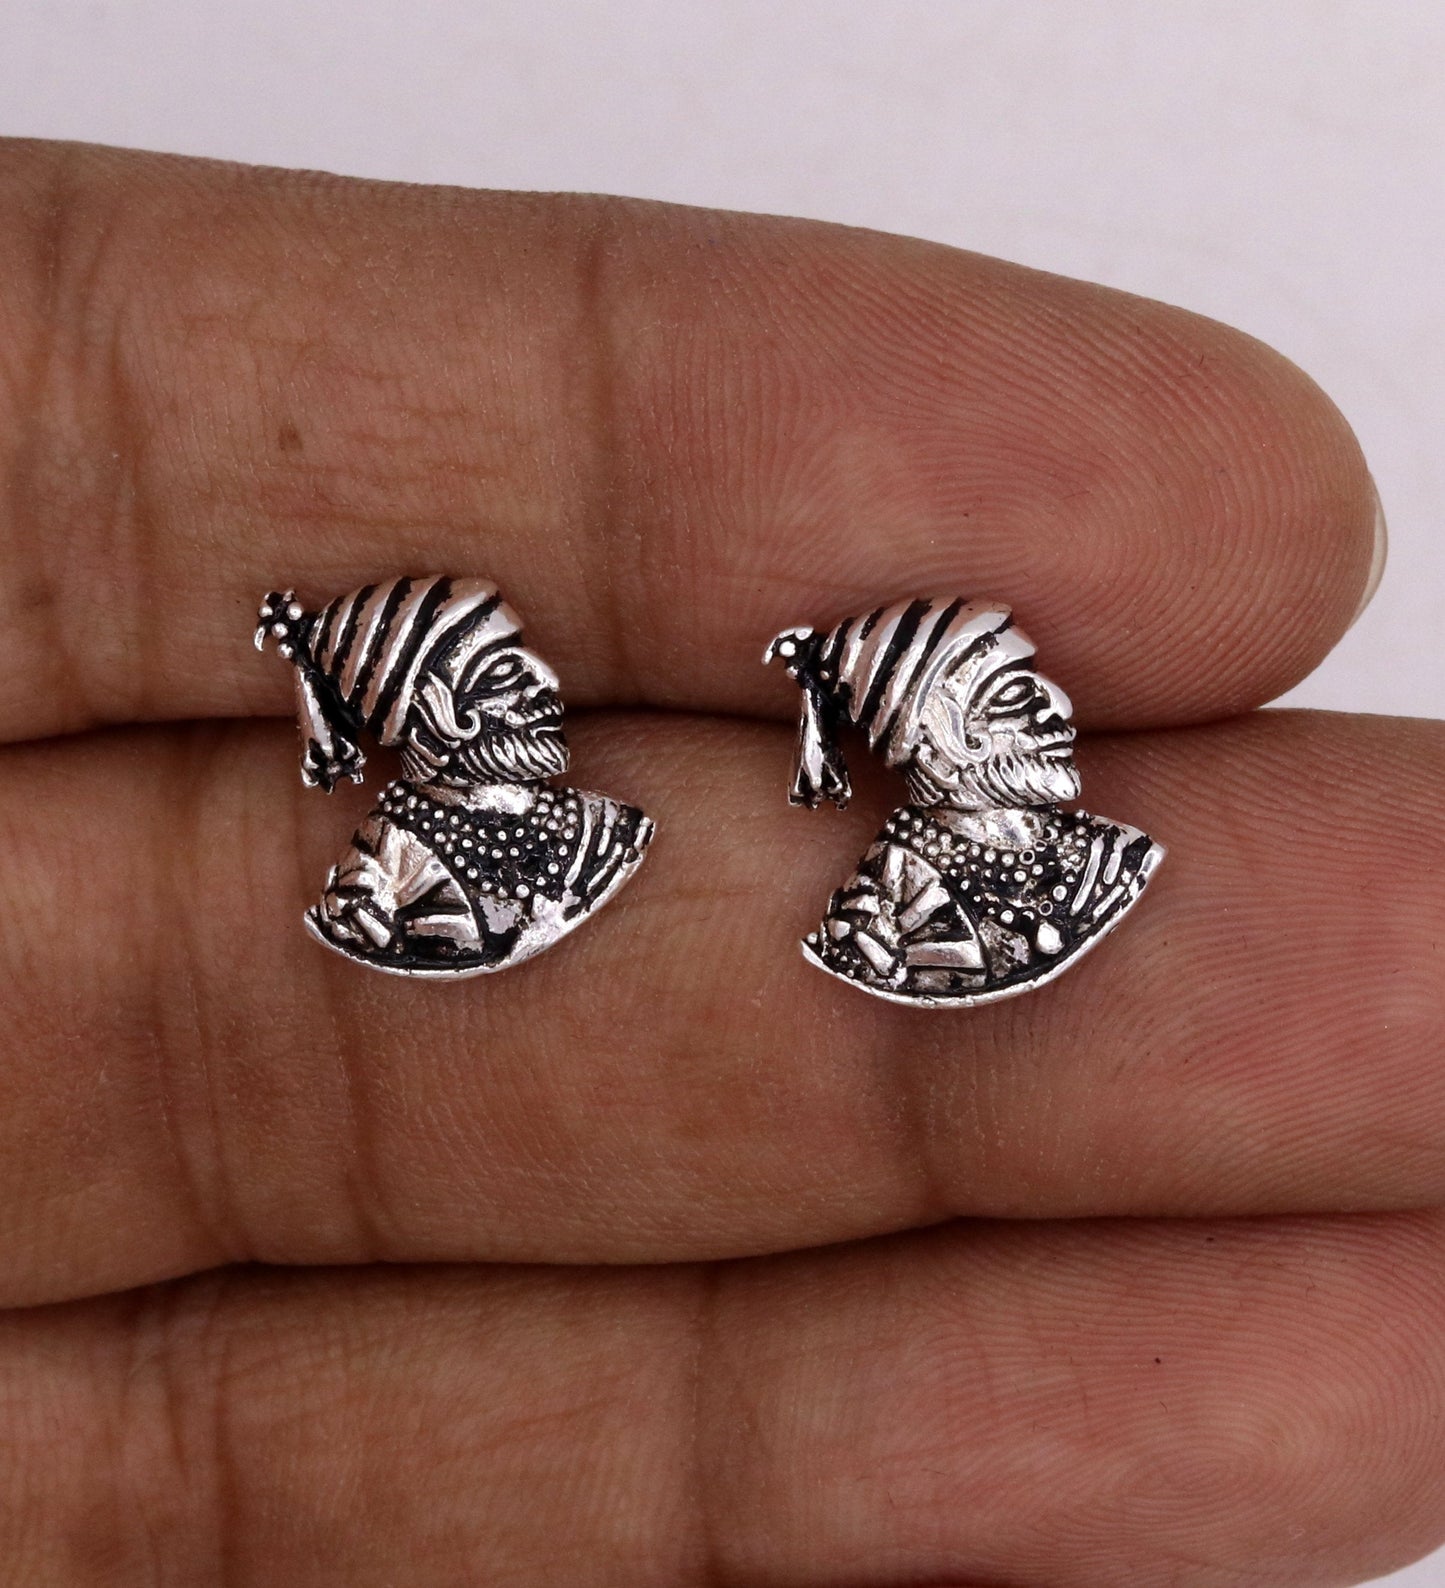 Handmade sterling silver fabulous indian maratha king shivaji design earring tribal style jewelry from Rajasthan India !!s35 - TRIBAL ORNAMENTS